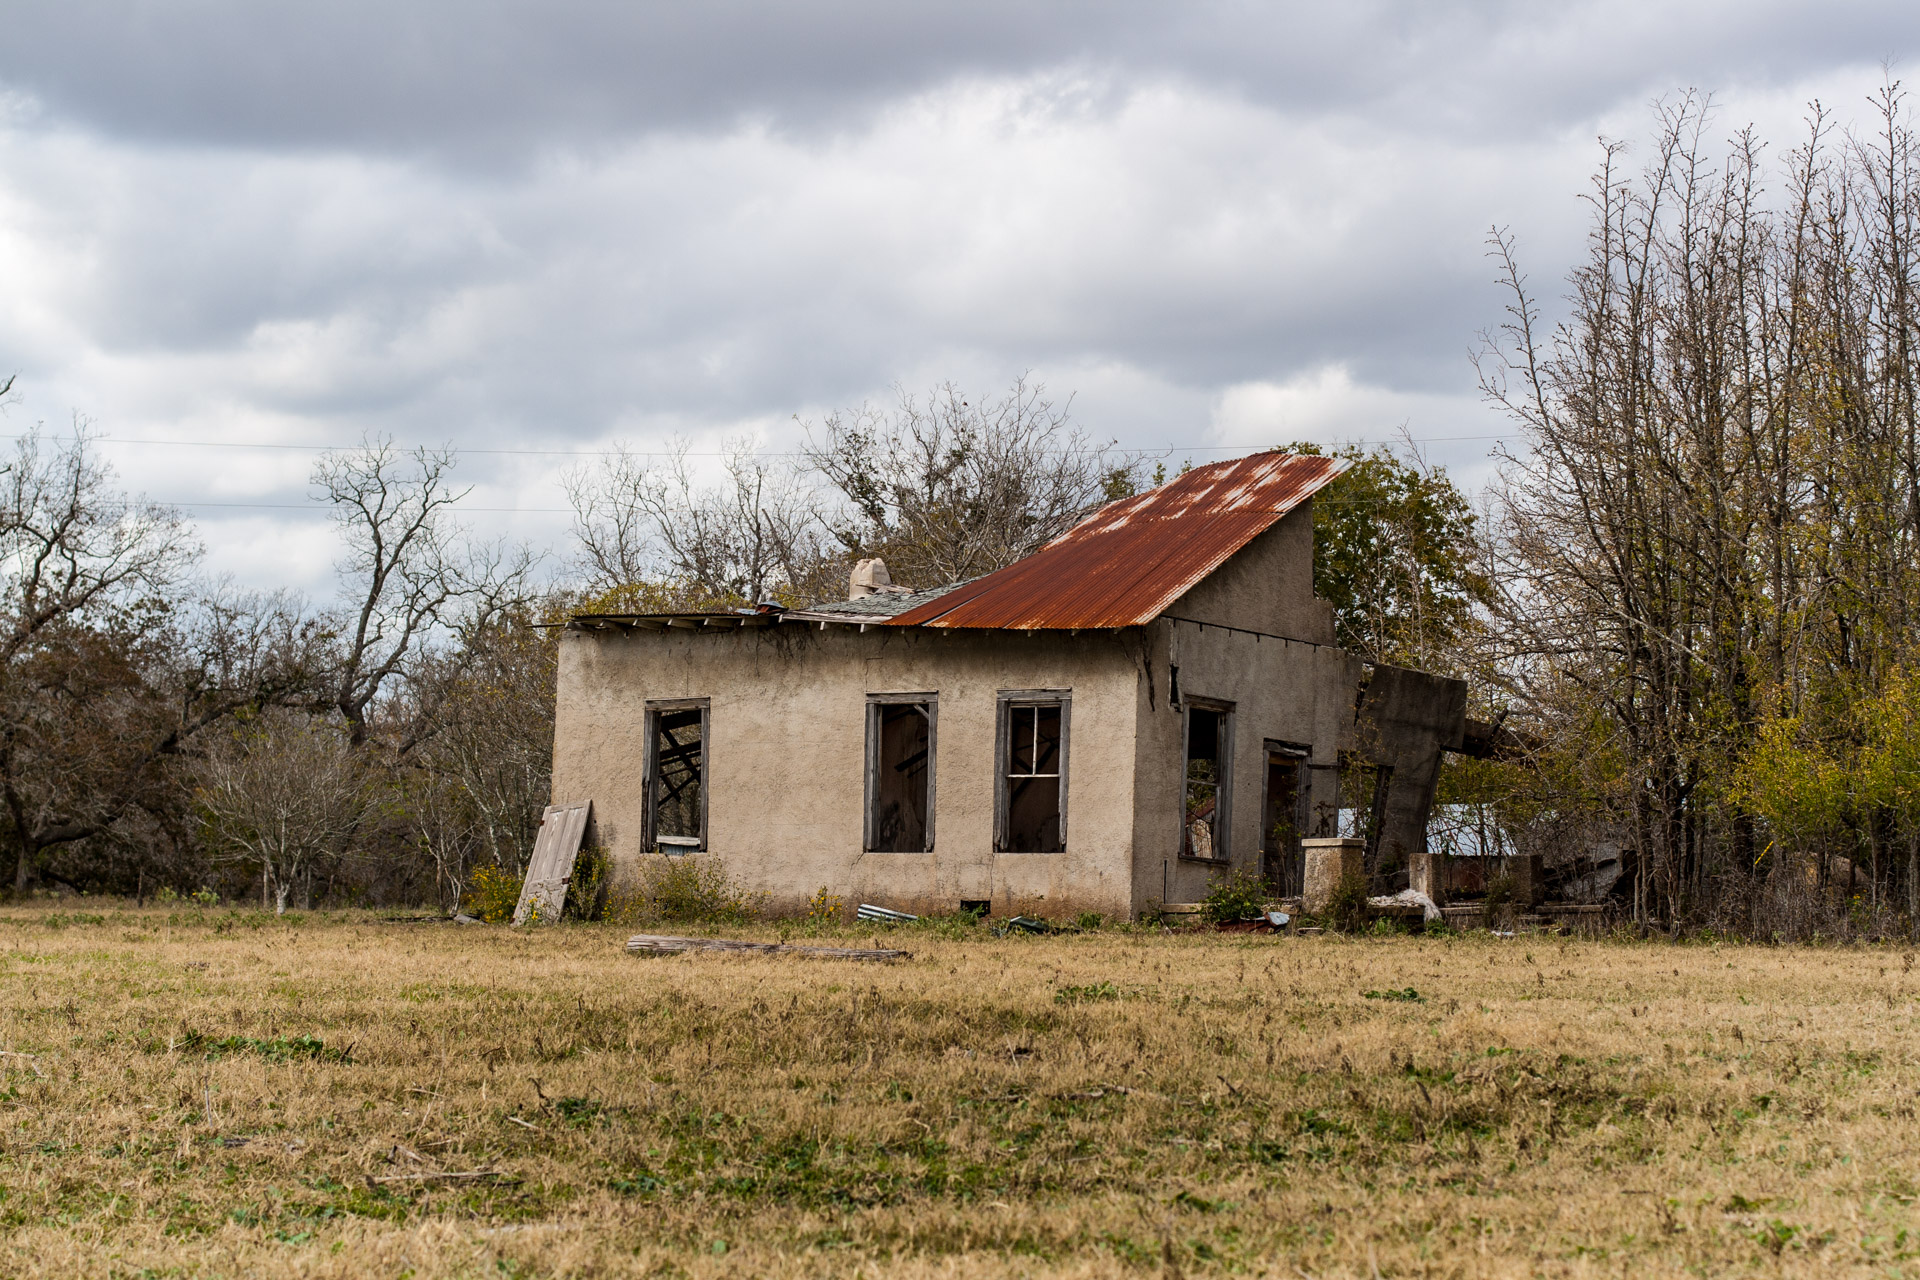 La Grange, Texas - An Impacted Roof Farmhouse (front right)